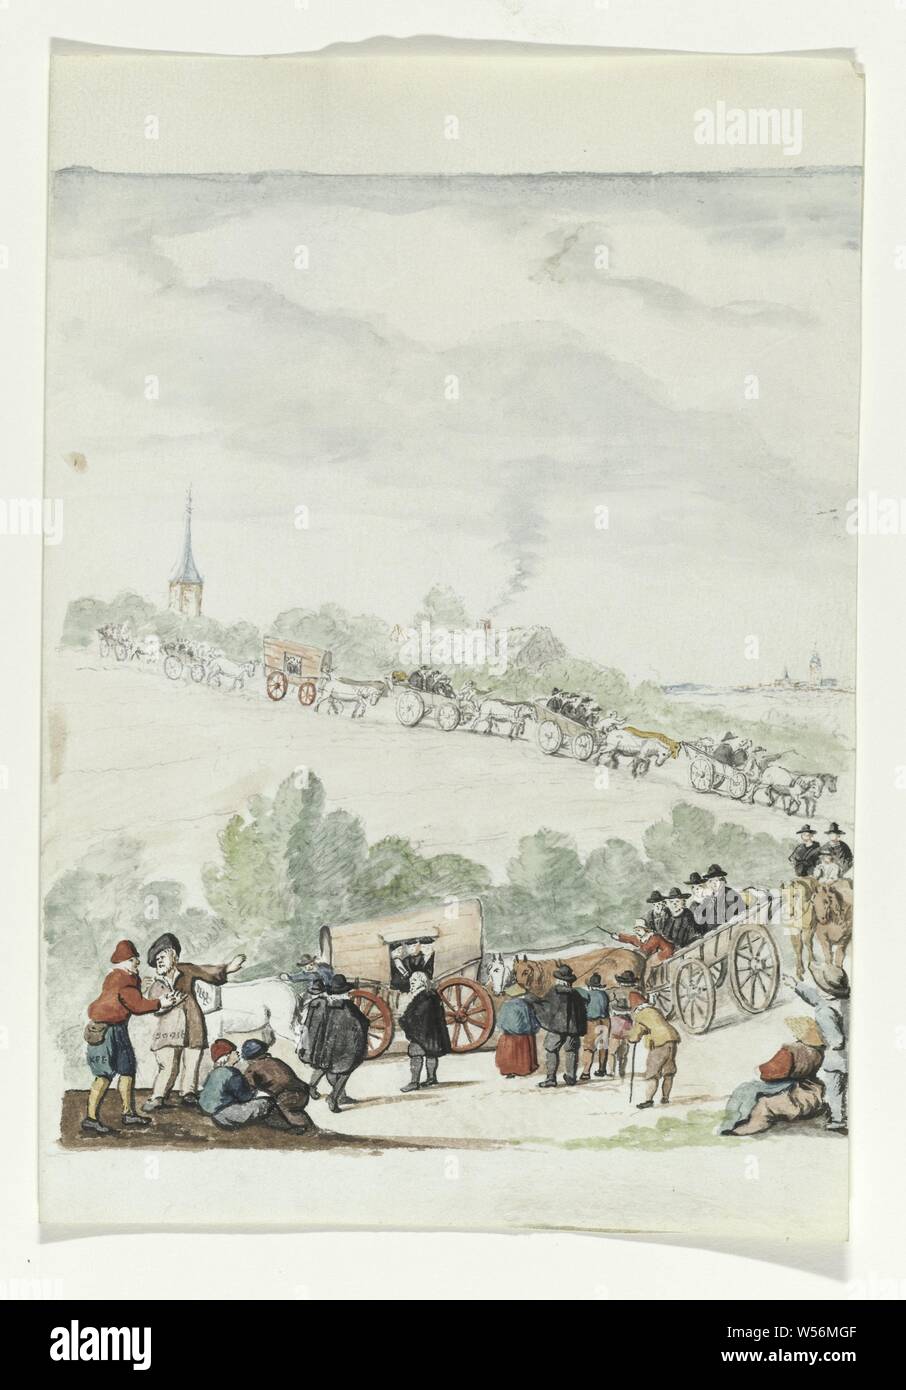 The exodus of the Remonstrants Regtspleging of Oldenbarnevelt (series title), Watercolor on which a procession of cars and people. In the background a church tower. Copy of the print entitled 'D'Arminiaensche uytvaert'. With handwritten explanation. Associated with series of watercolors in book, Johan van Oldenbarnevelt, anonymous, Netherlands, 1708 - 1795, parchment (animal material), watercolor (paint), ink, pen, h 23.5 cm × w 19 cm Stock Photo